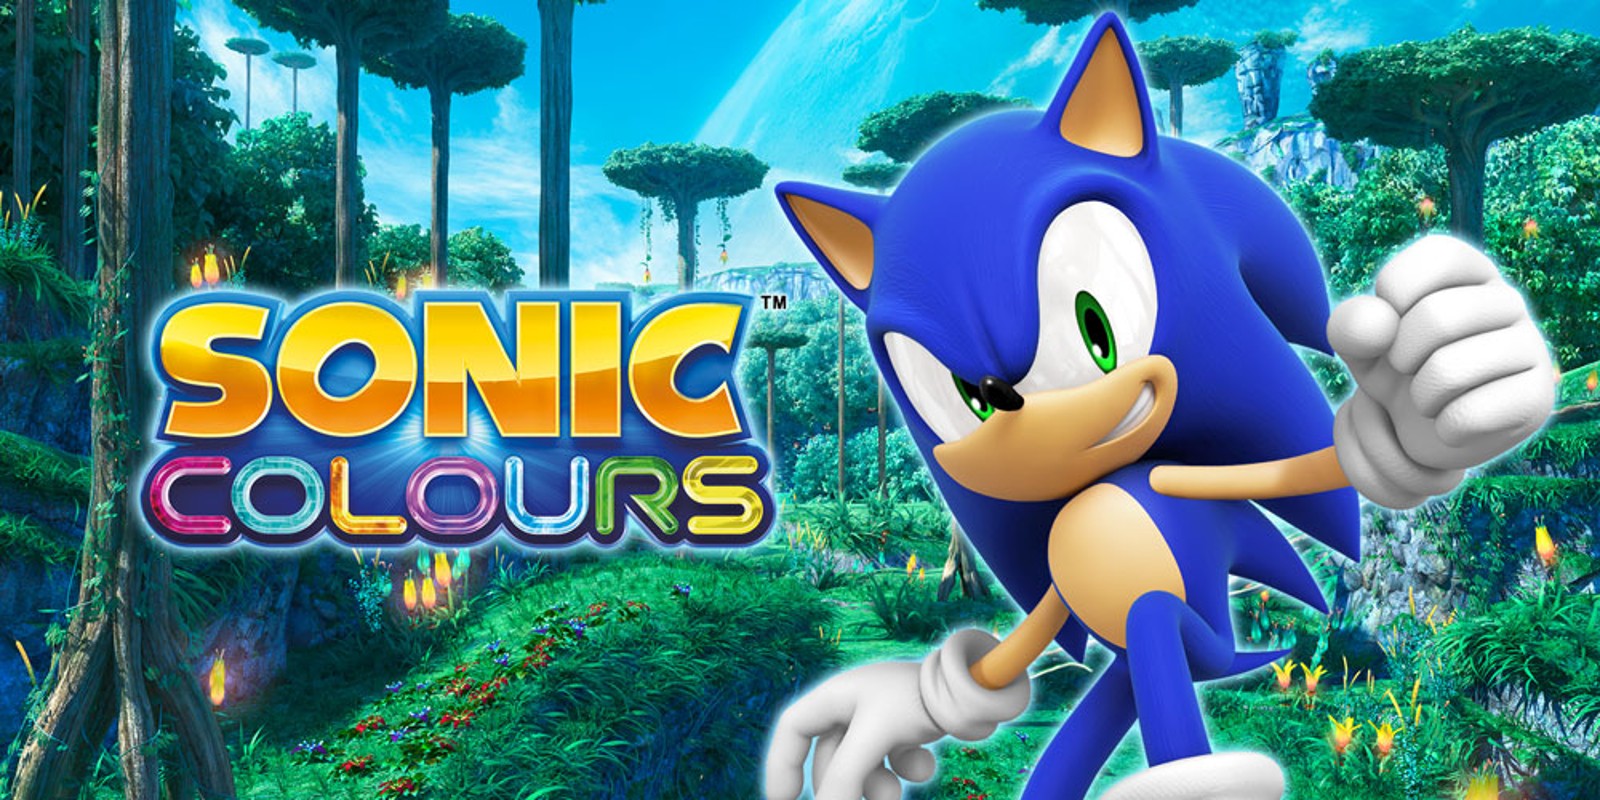 Update: Sonic Colors Ultimate has been listed for Switch. 